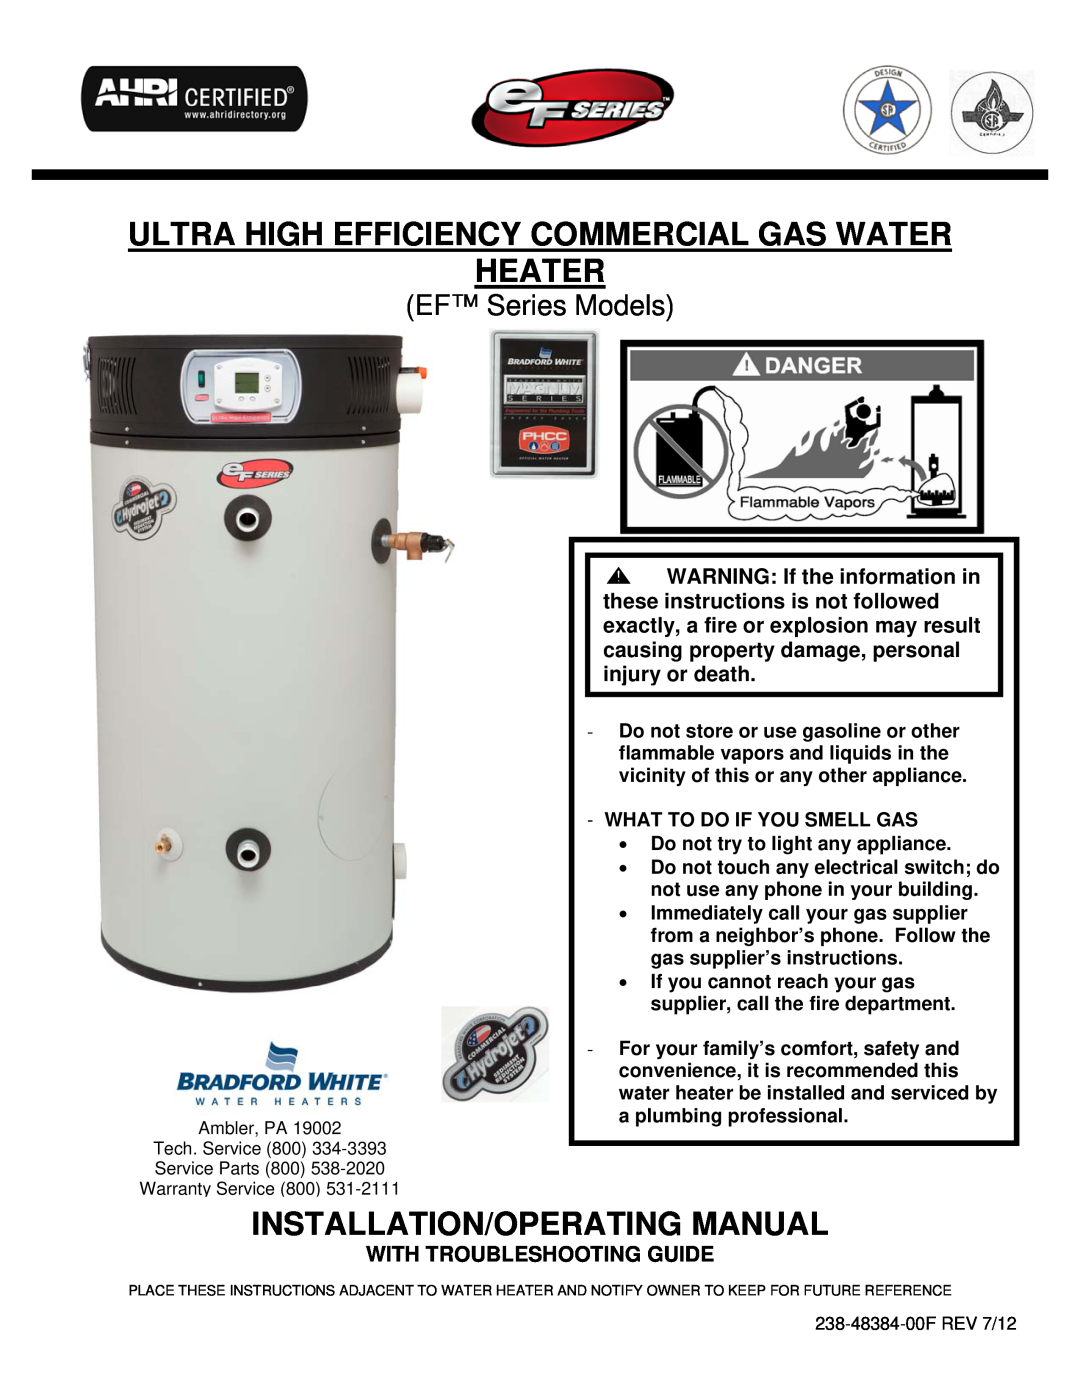 Bradford-White Corp ULTRA HIGH EFFICIENCY COMMERCIAL GAS WATER HEATER, 238-48384-00F warranty With Troubleshooting Guide 